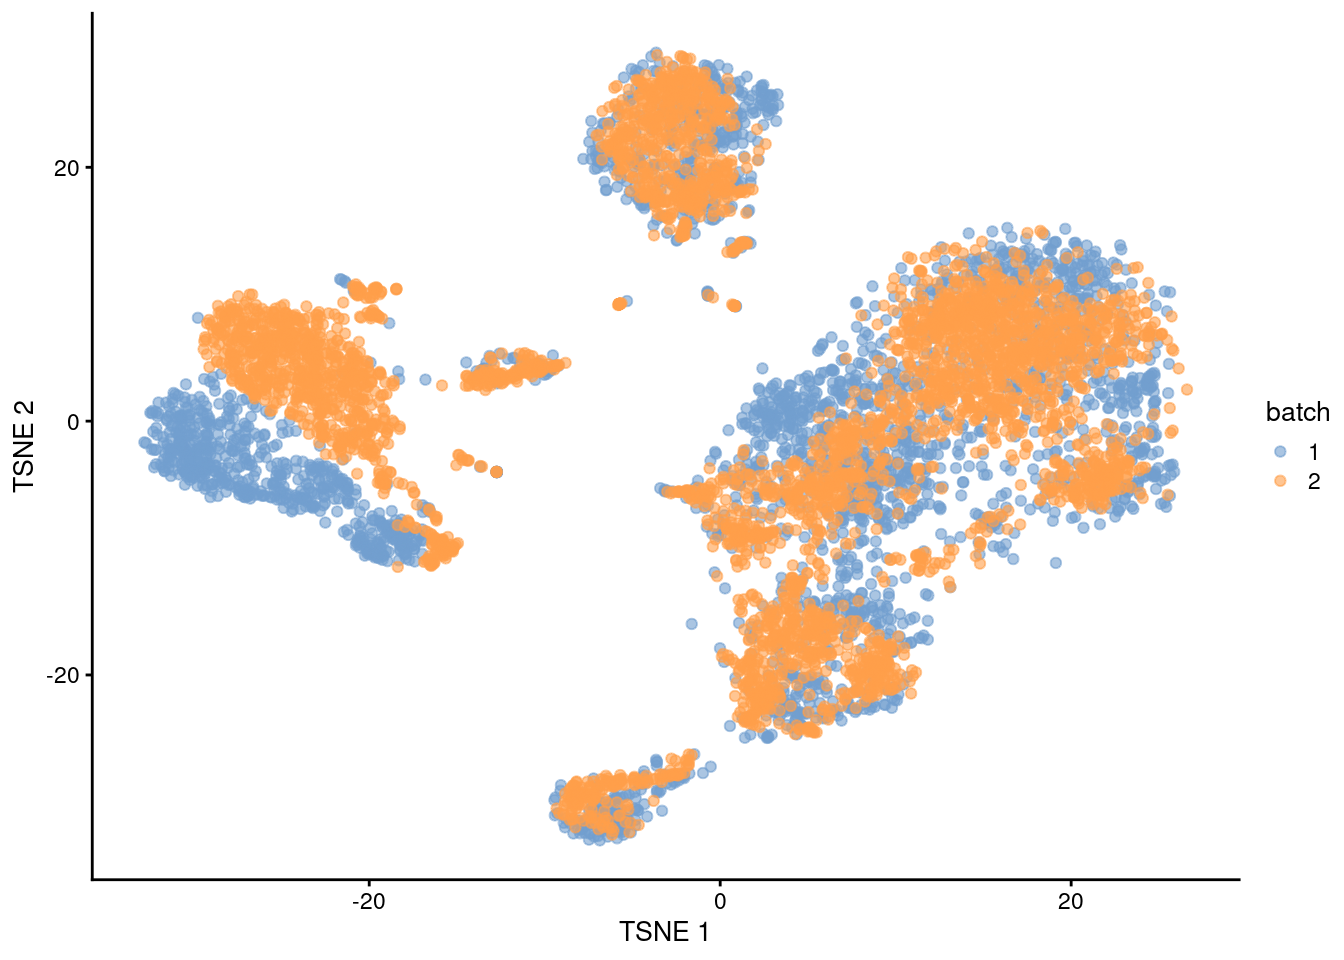 $t$-SNE plot of the PBMC datasets after correction with `rescaleBatches()`. Each point represents a cell and is colored according to the batch of origin.